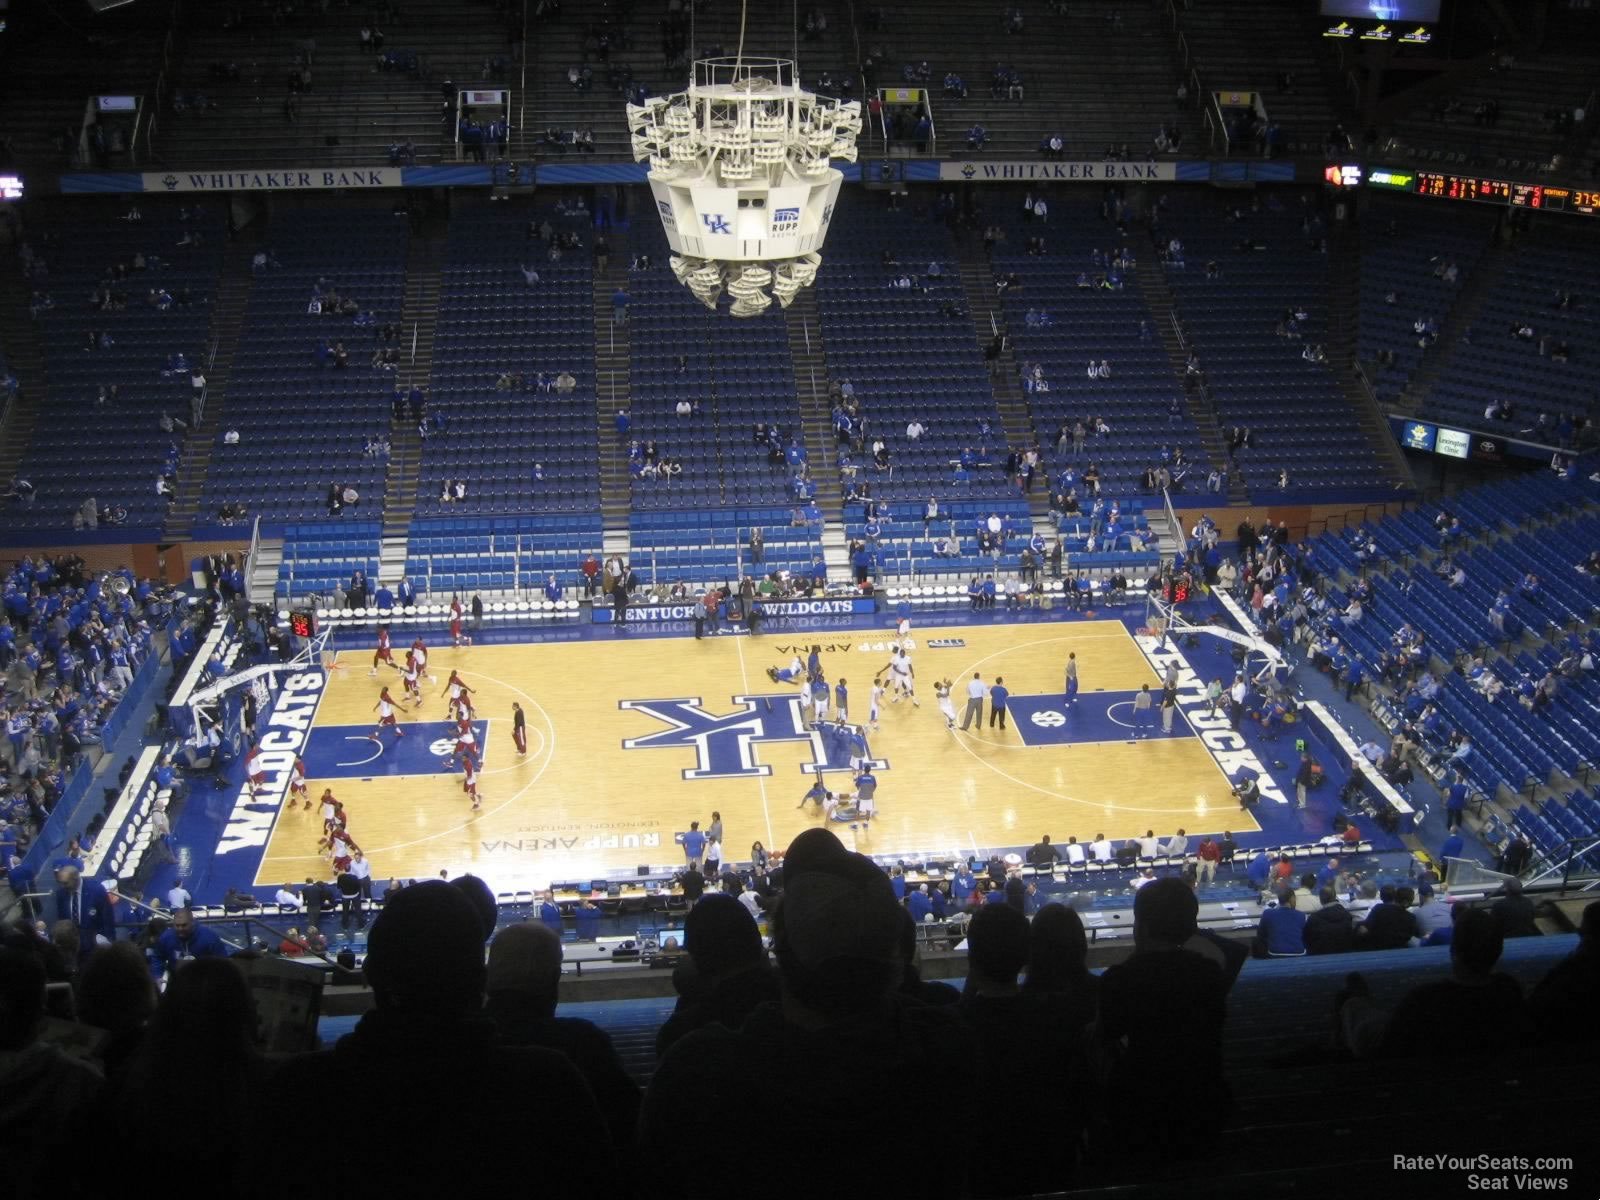 section 231, row cc seat view  for basketball - rupp arena